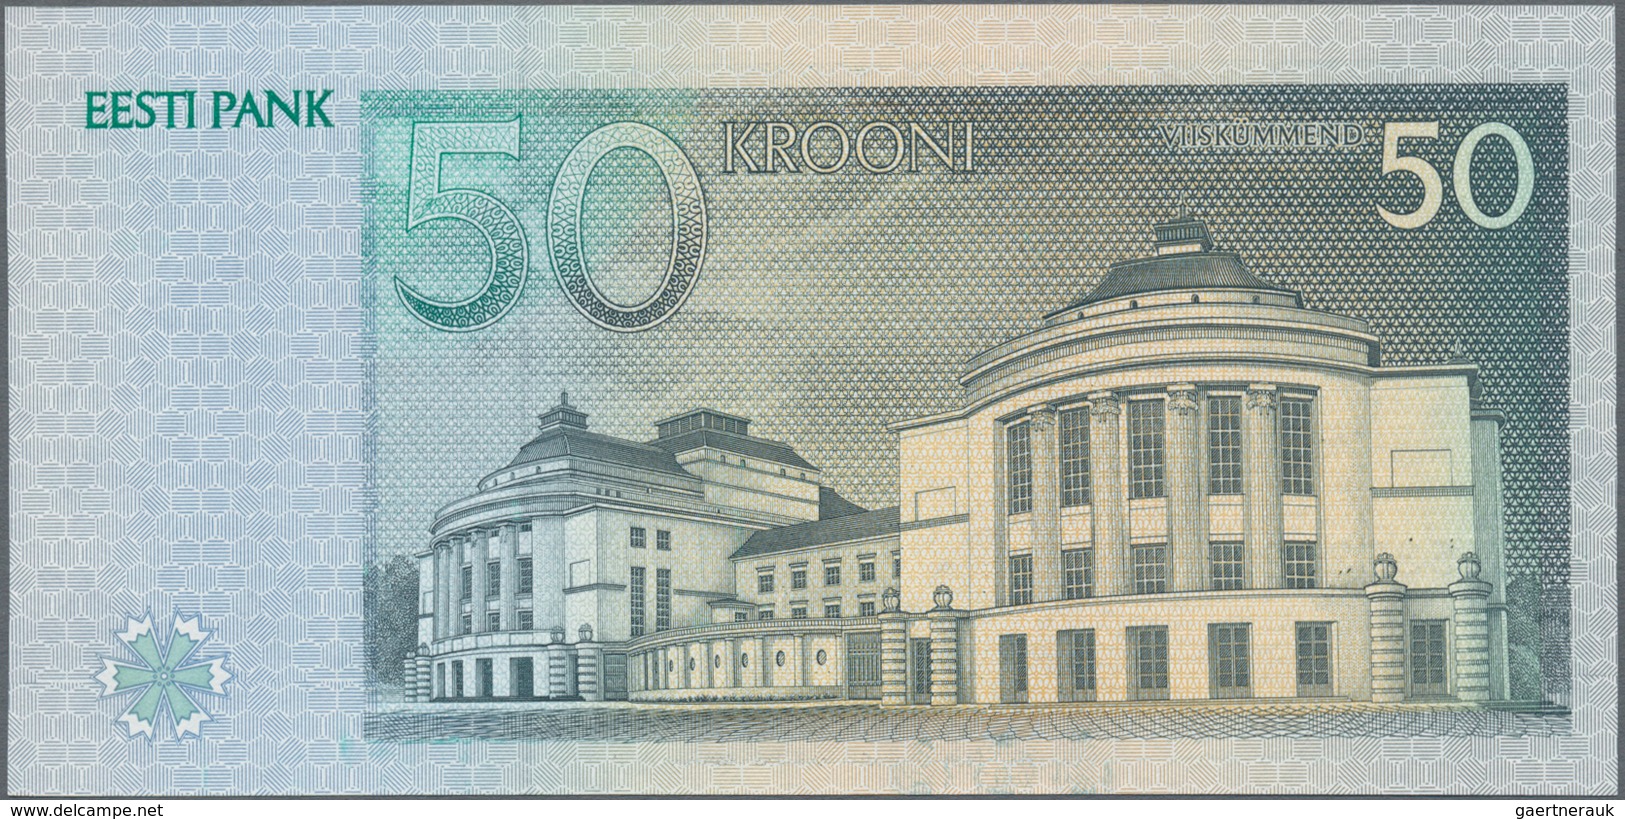 Estonia / Estland: Lot with 5 Banknotes series 1994 with 5, 10, 50, 100 and 500 Krooni, P.76a-80a, a